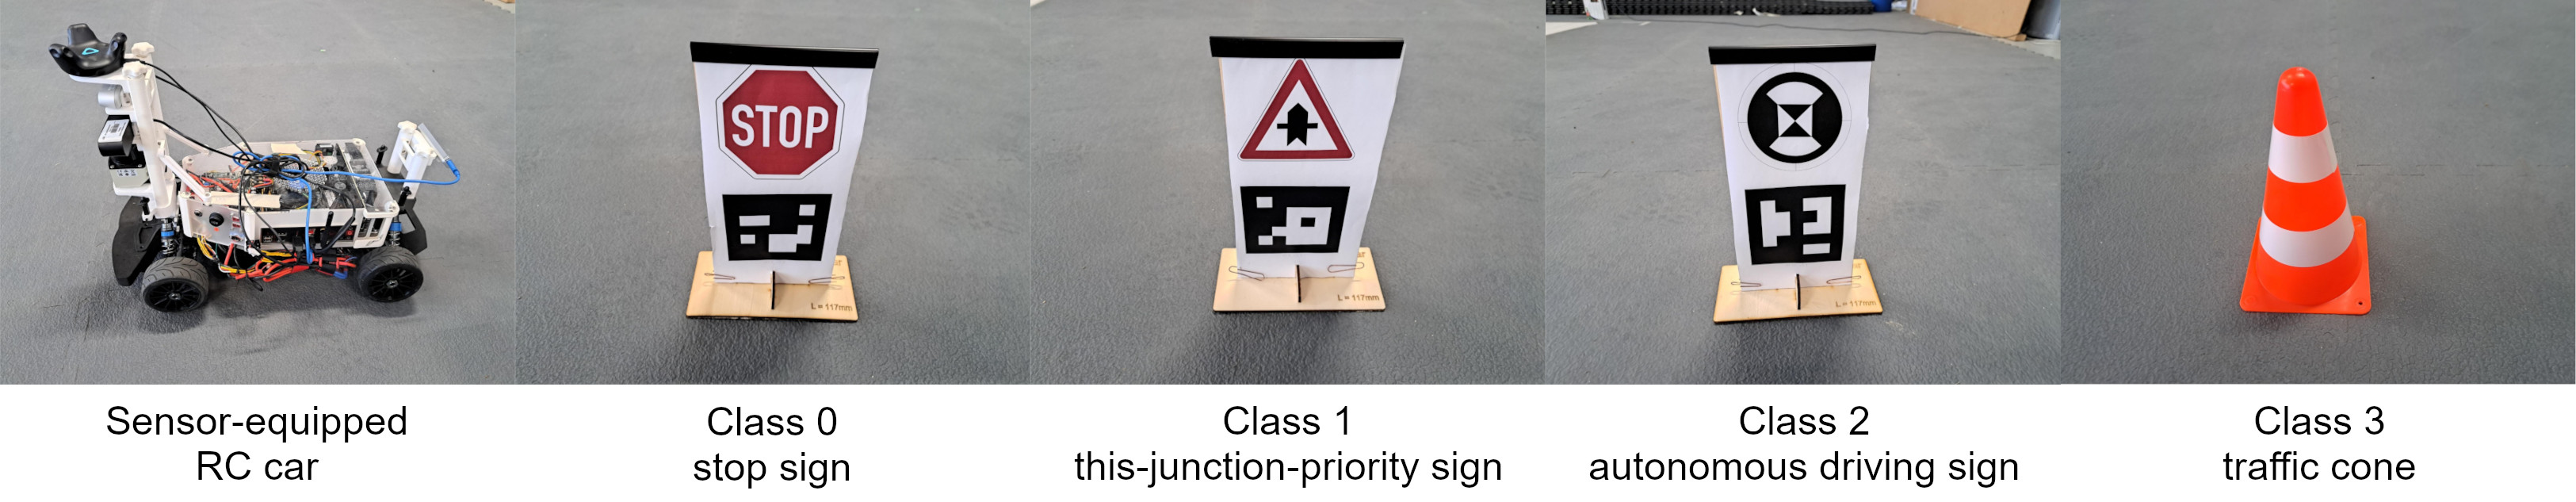 Sensor-equipped RC car, a stop sign (class 0), a this-junction-priority-sign (class 1), an autonomous driving sign (clasc 2) and a traffic cone (class 3)